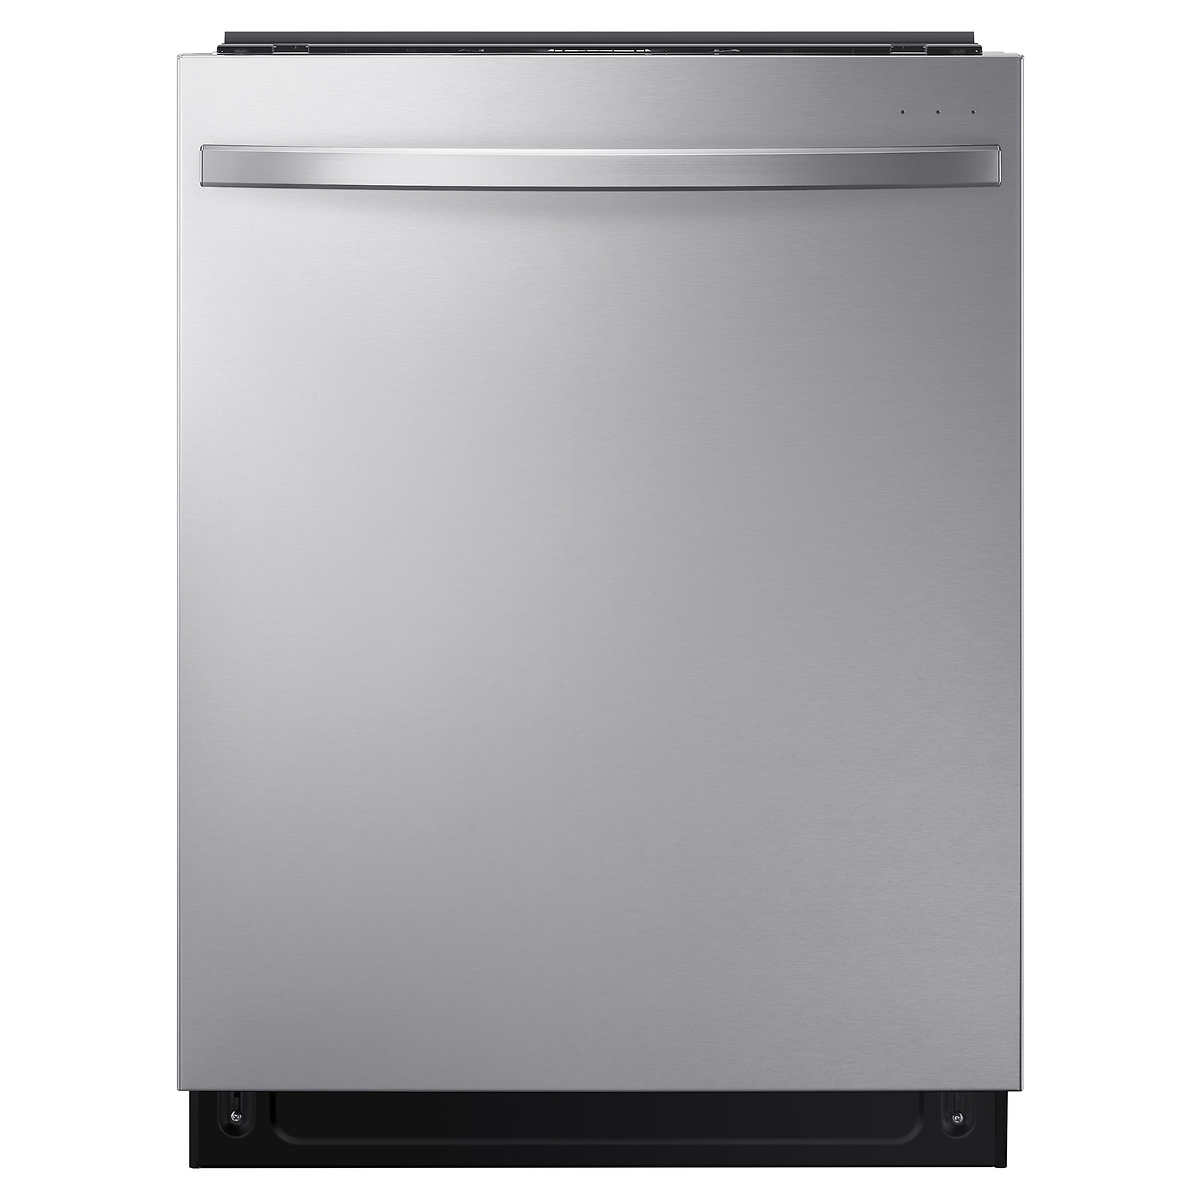 Samsung Top Control Dishwasher With Stormwash Cleaning